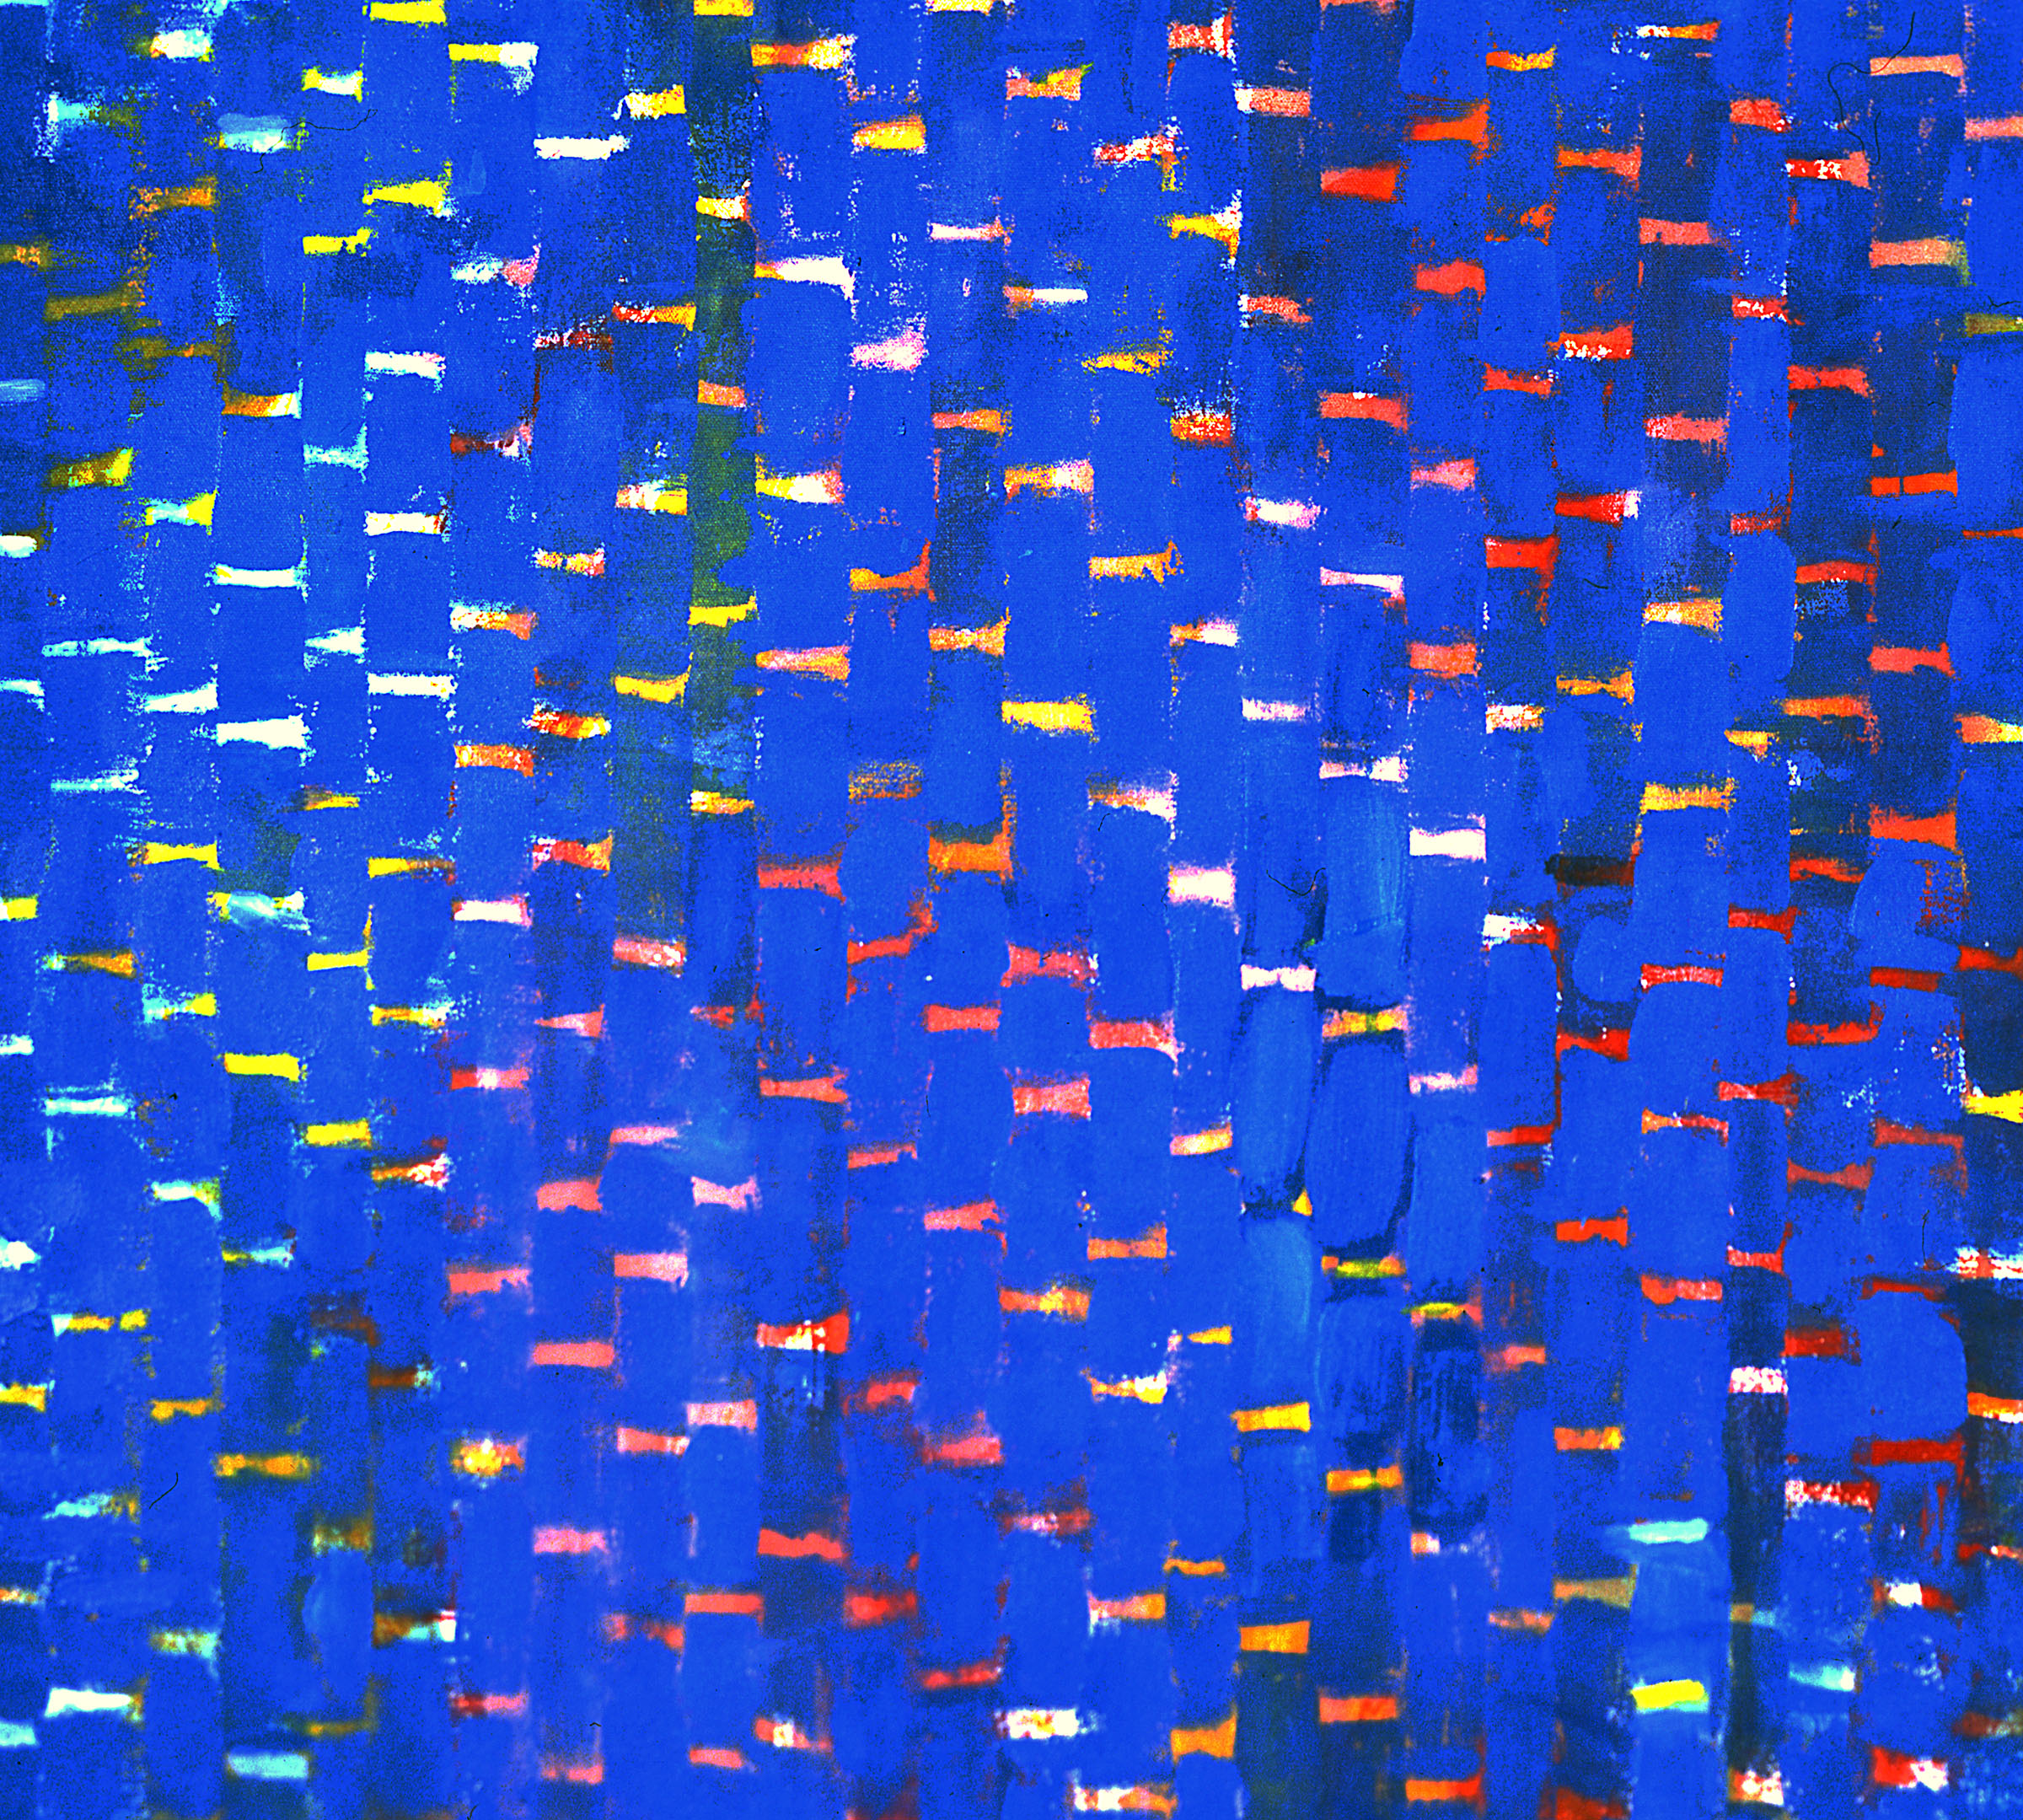 50 Years Ago, Alma Thomas Made 'Space' Paintings that Imagined the